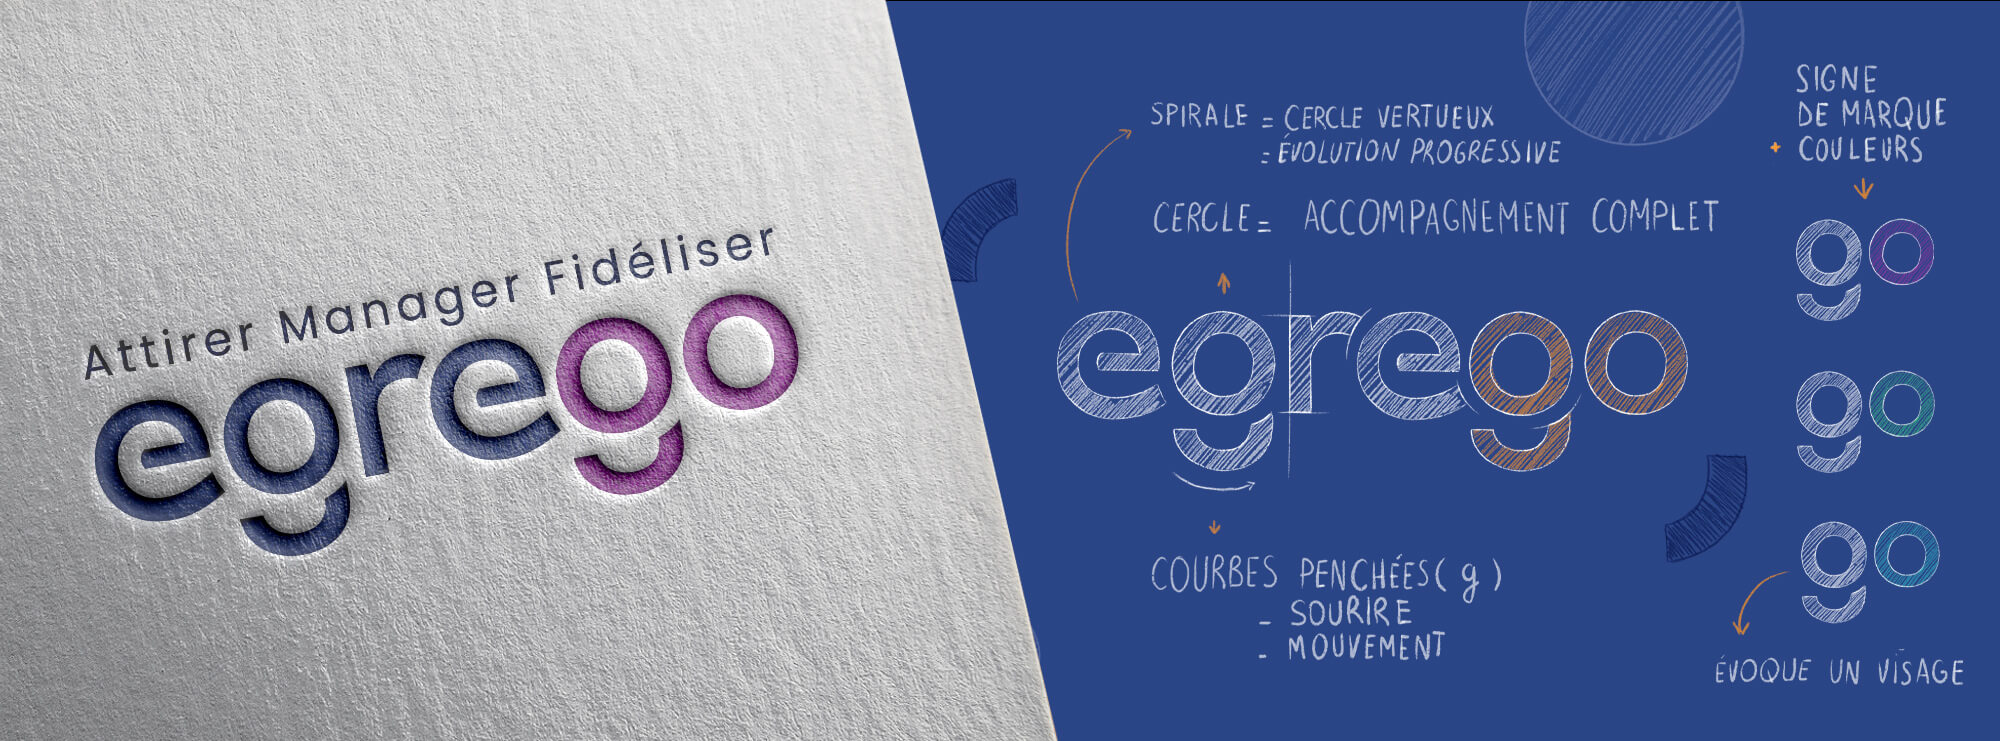 Egrego - an attractive brand